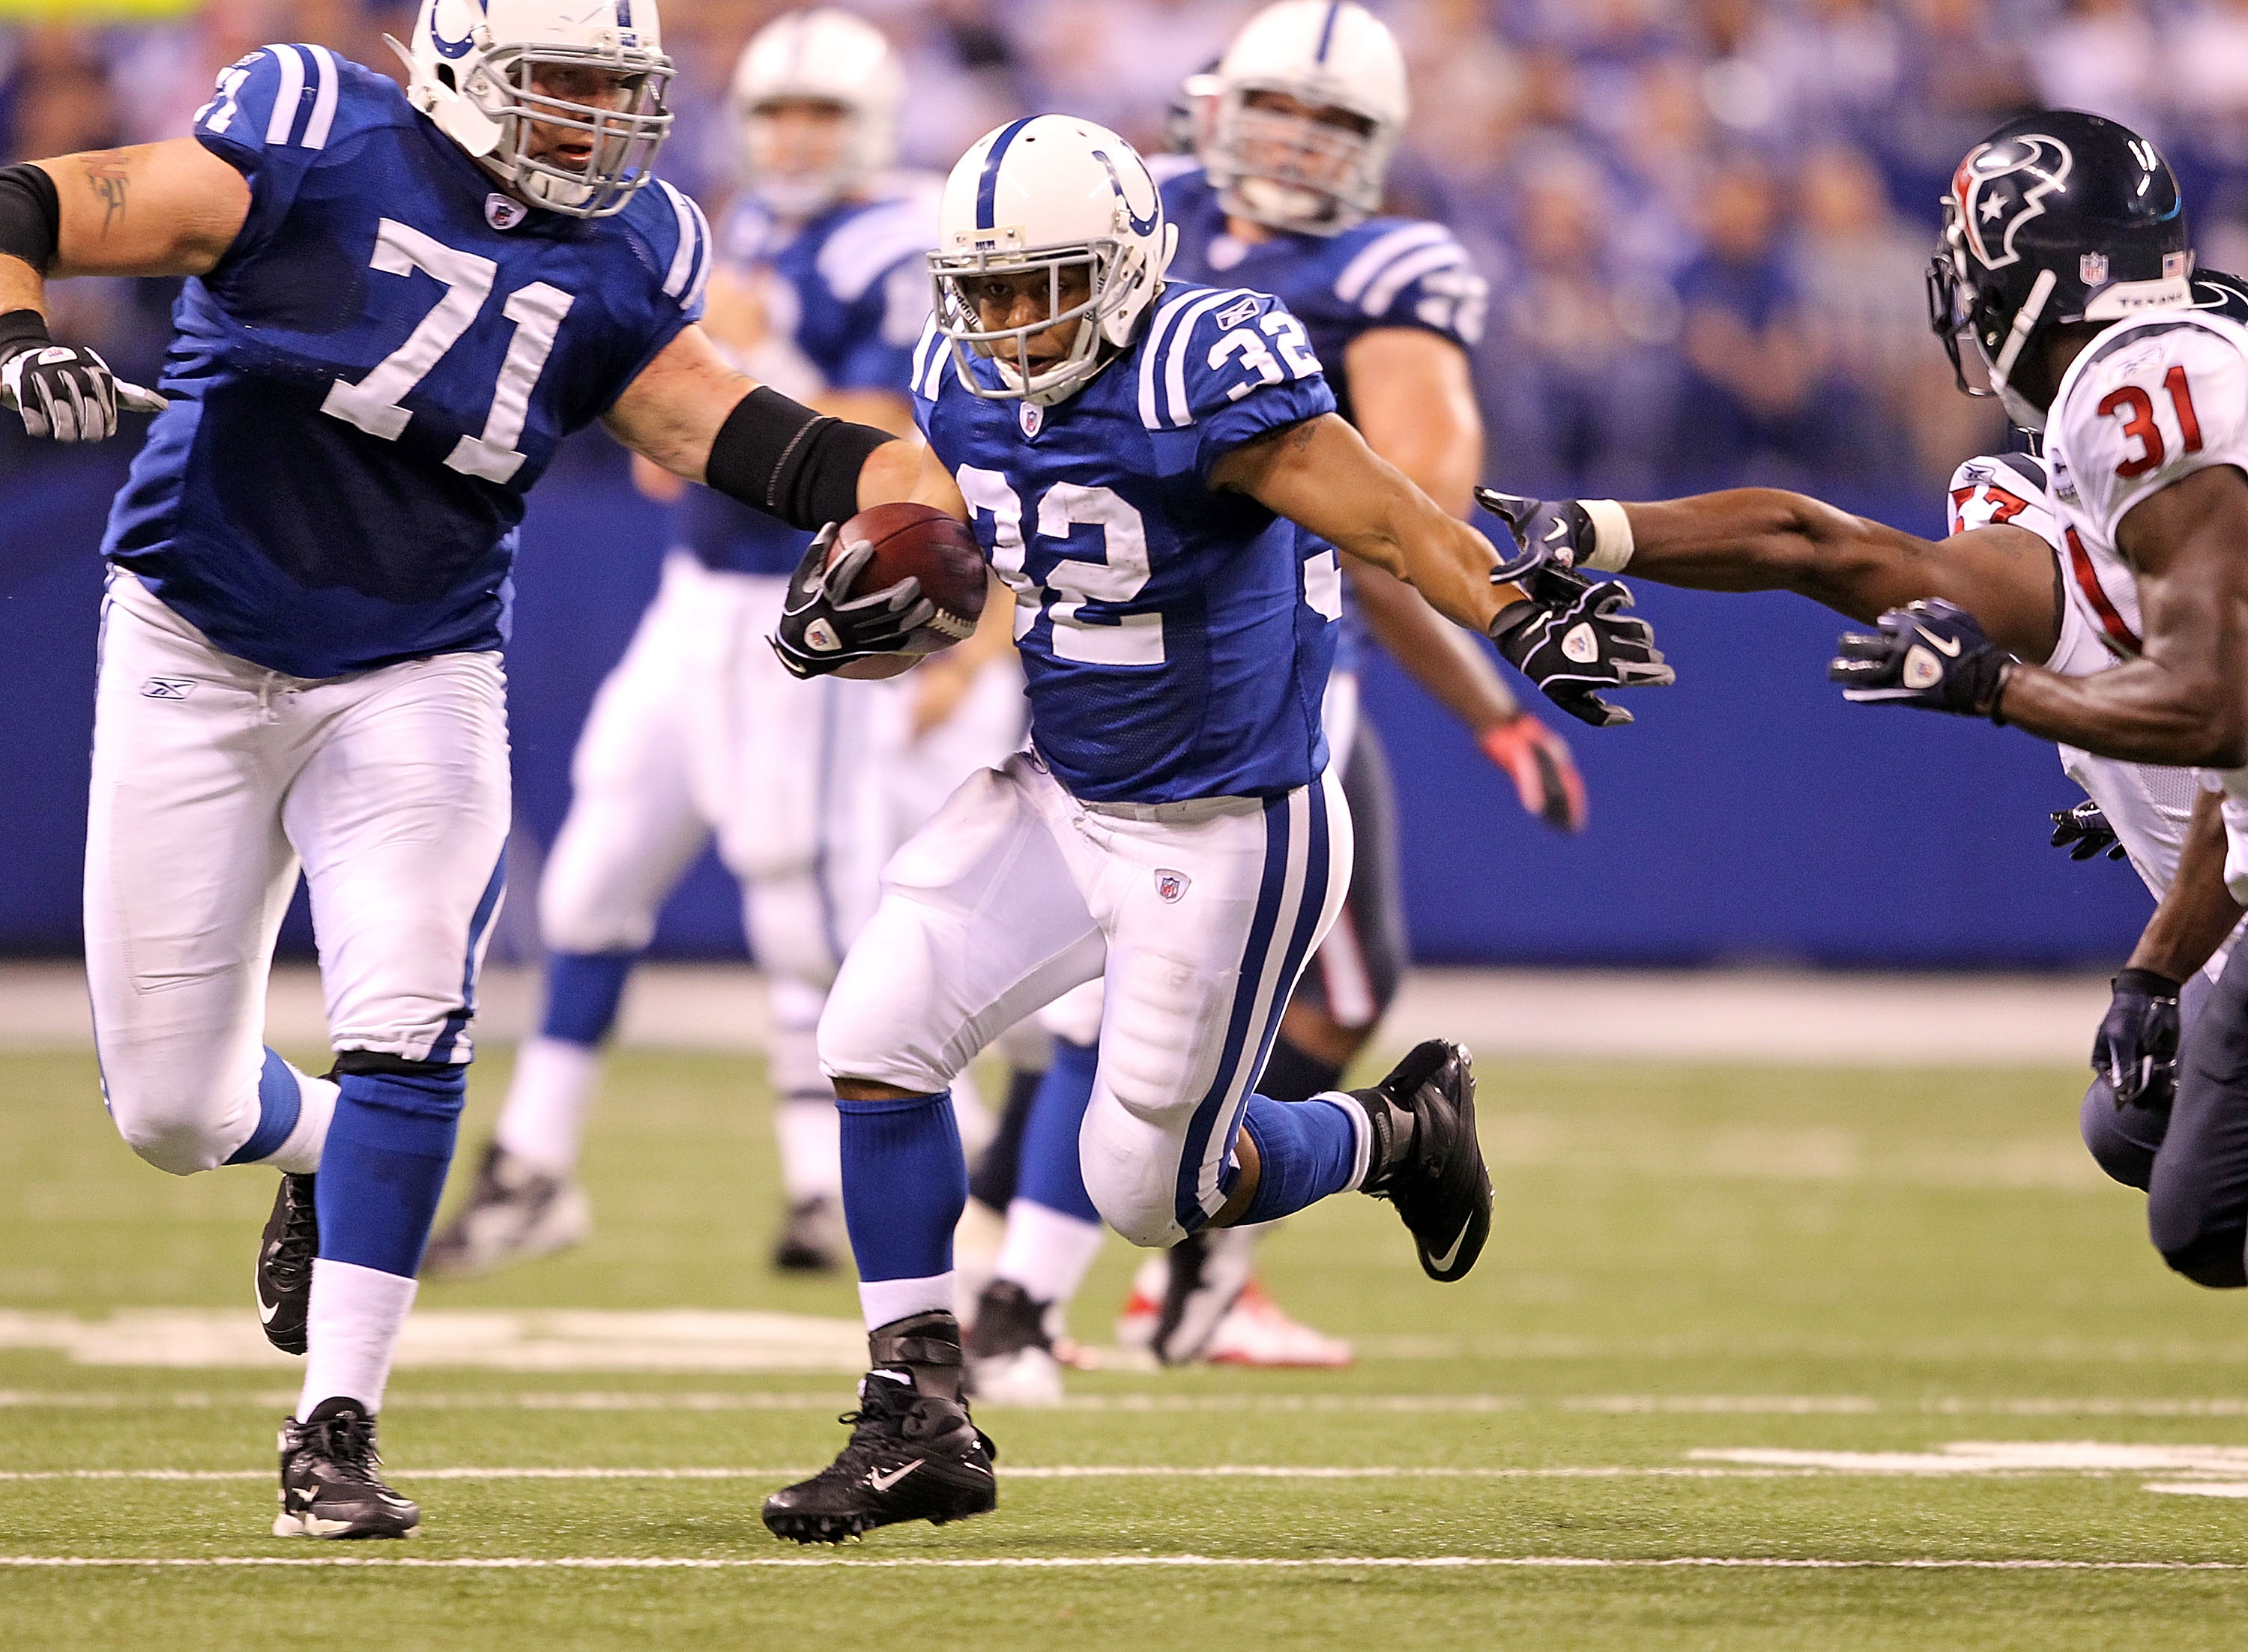 INDIANAPOLIS - NOVEMBER 01:  Mike Hart #32 of Indianapolis Colts runs with the ball during  the NFL game against the Houston Texans  at Lucas Oil Stadium on November 1, 2010 in Indianapolis, Indiana.  (Photo by Andy Lyons/Getty Images)